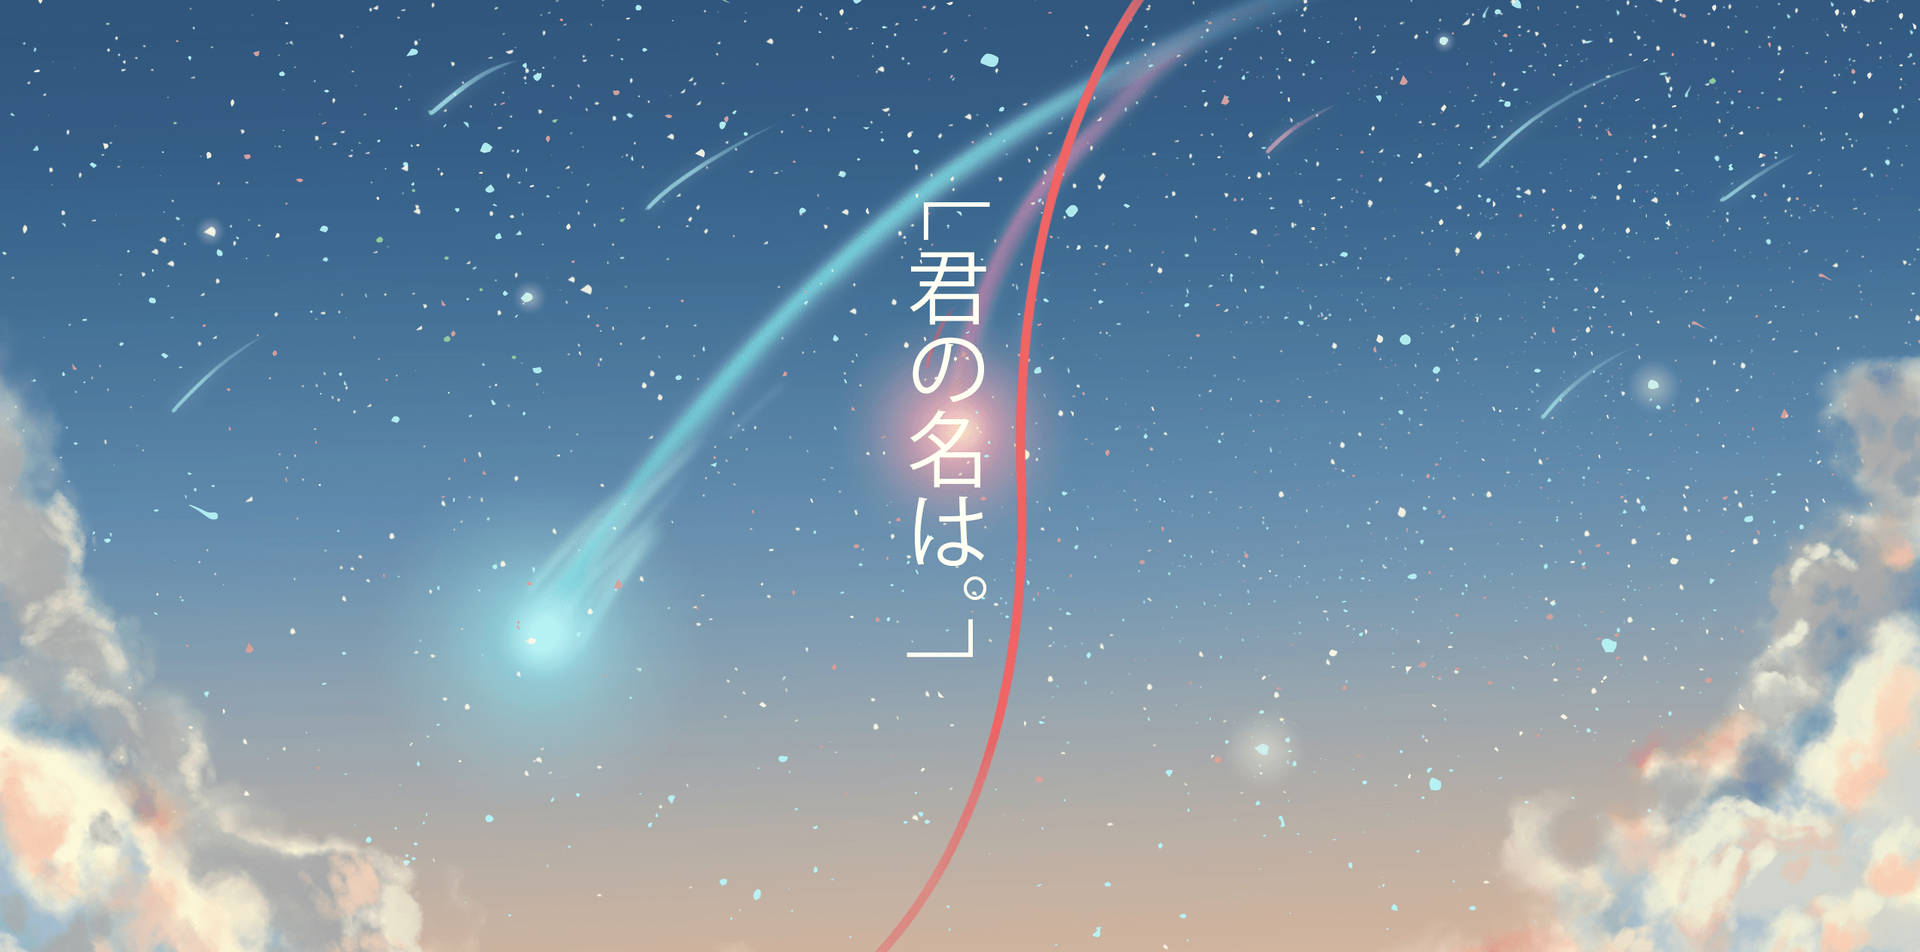 Your Name Comet And Red String Background